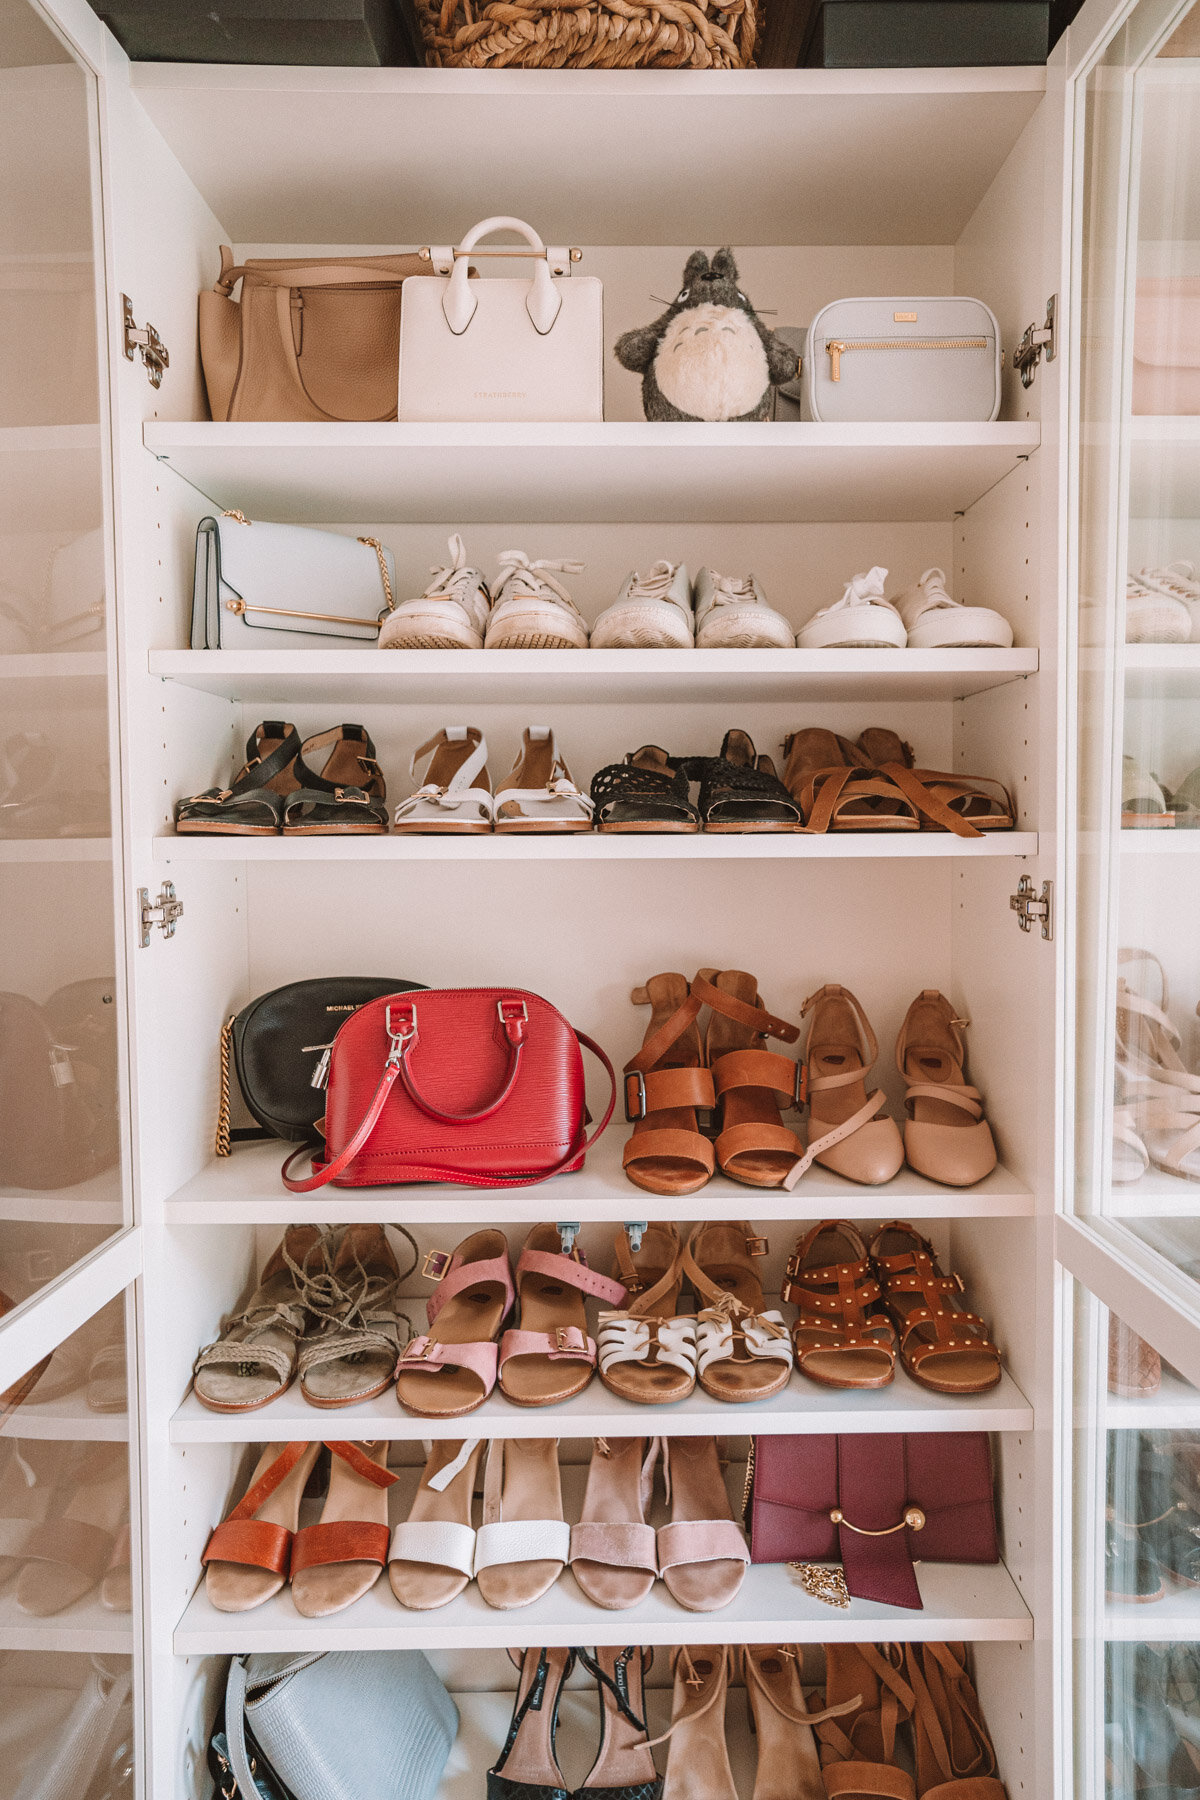 Use bookcases to store and showcase your handbags/shoe collection